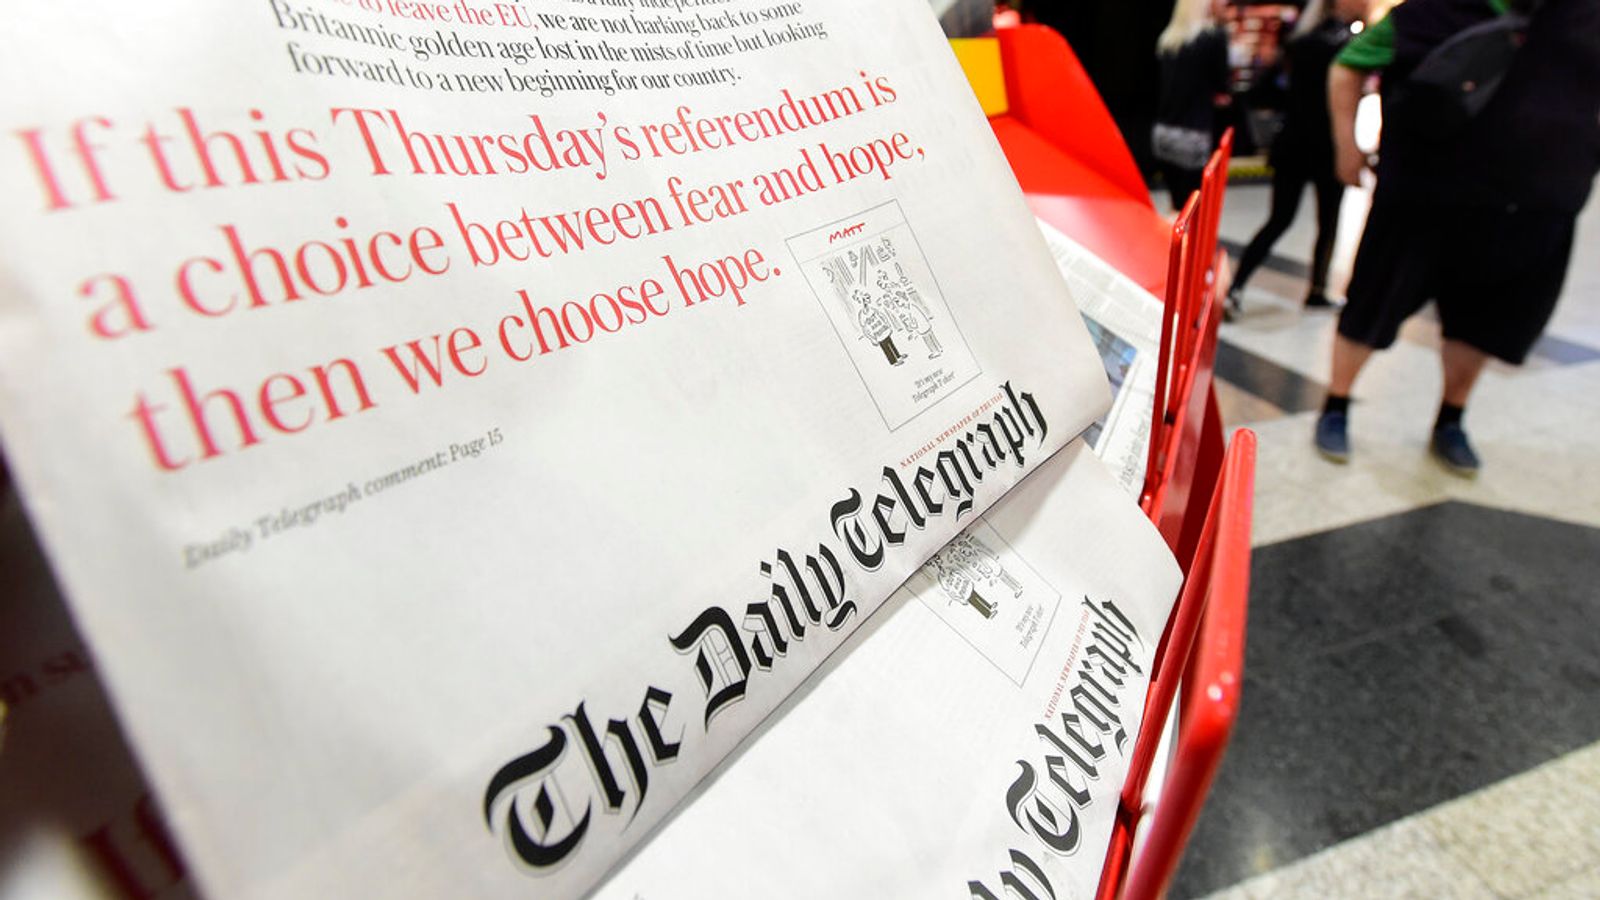 Telegraph owner tables last-ditch bid to keep control of newspapers